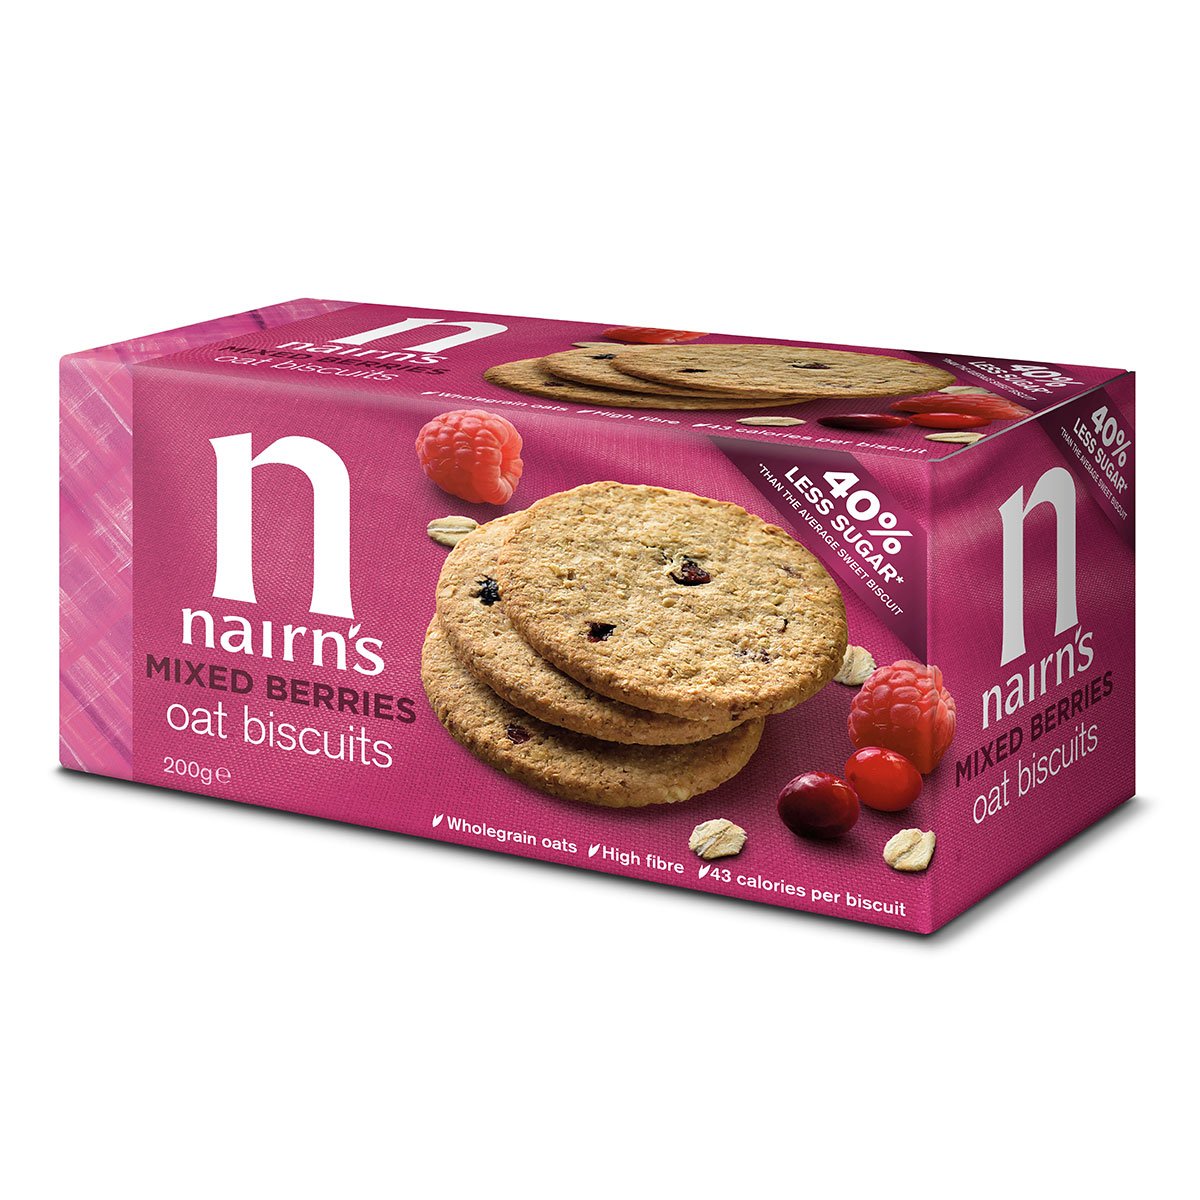 Nairns Mixed Berries Oat Biscuits wheat free 200g - Just Natural